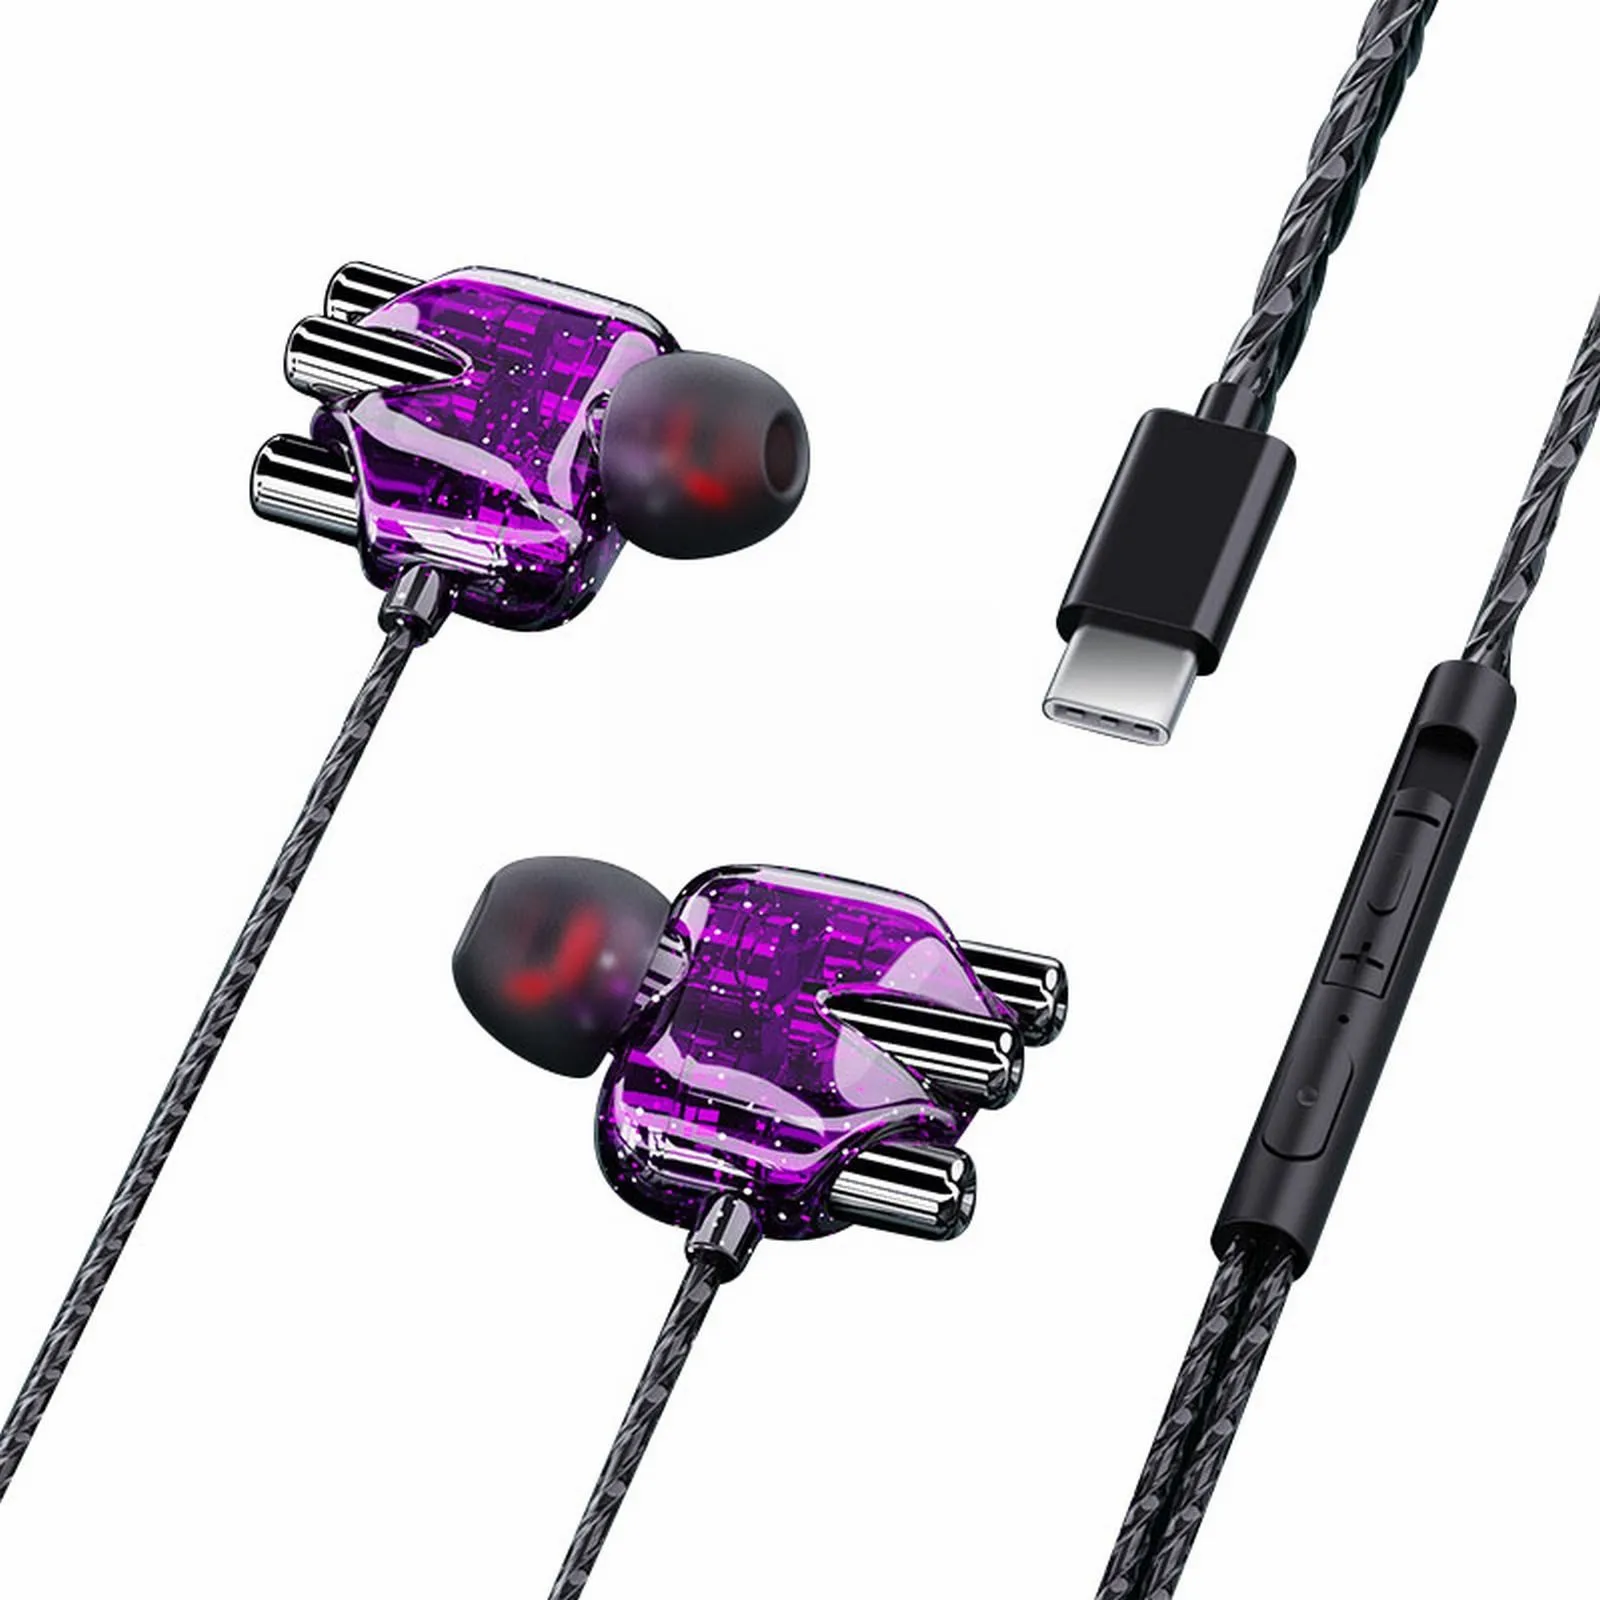 

Type-C 9D Stereo With Mic Earphones Headphon In-ear Wired Headphones Bass Wire Earphon Earbud Phone Headset With Microphone